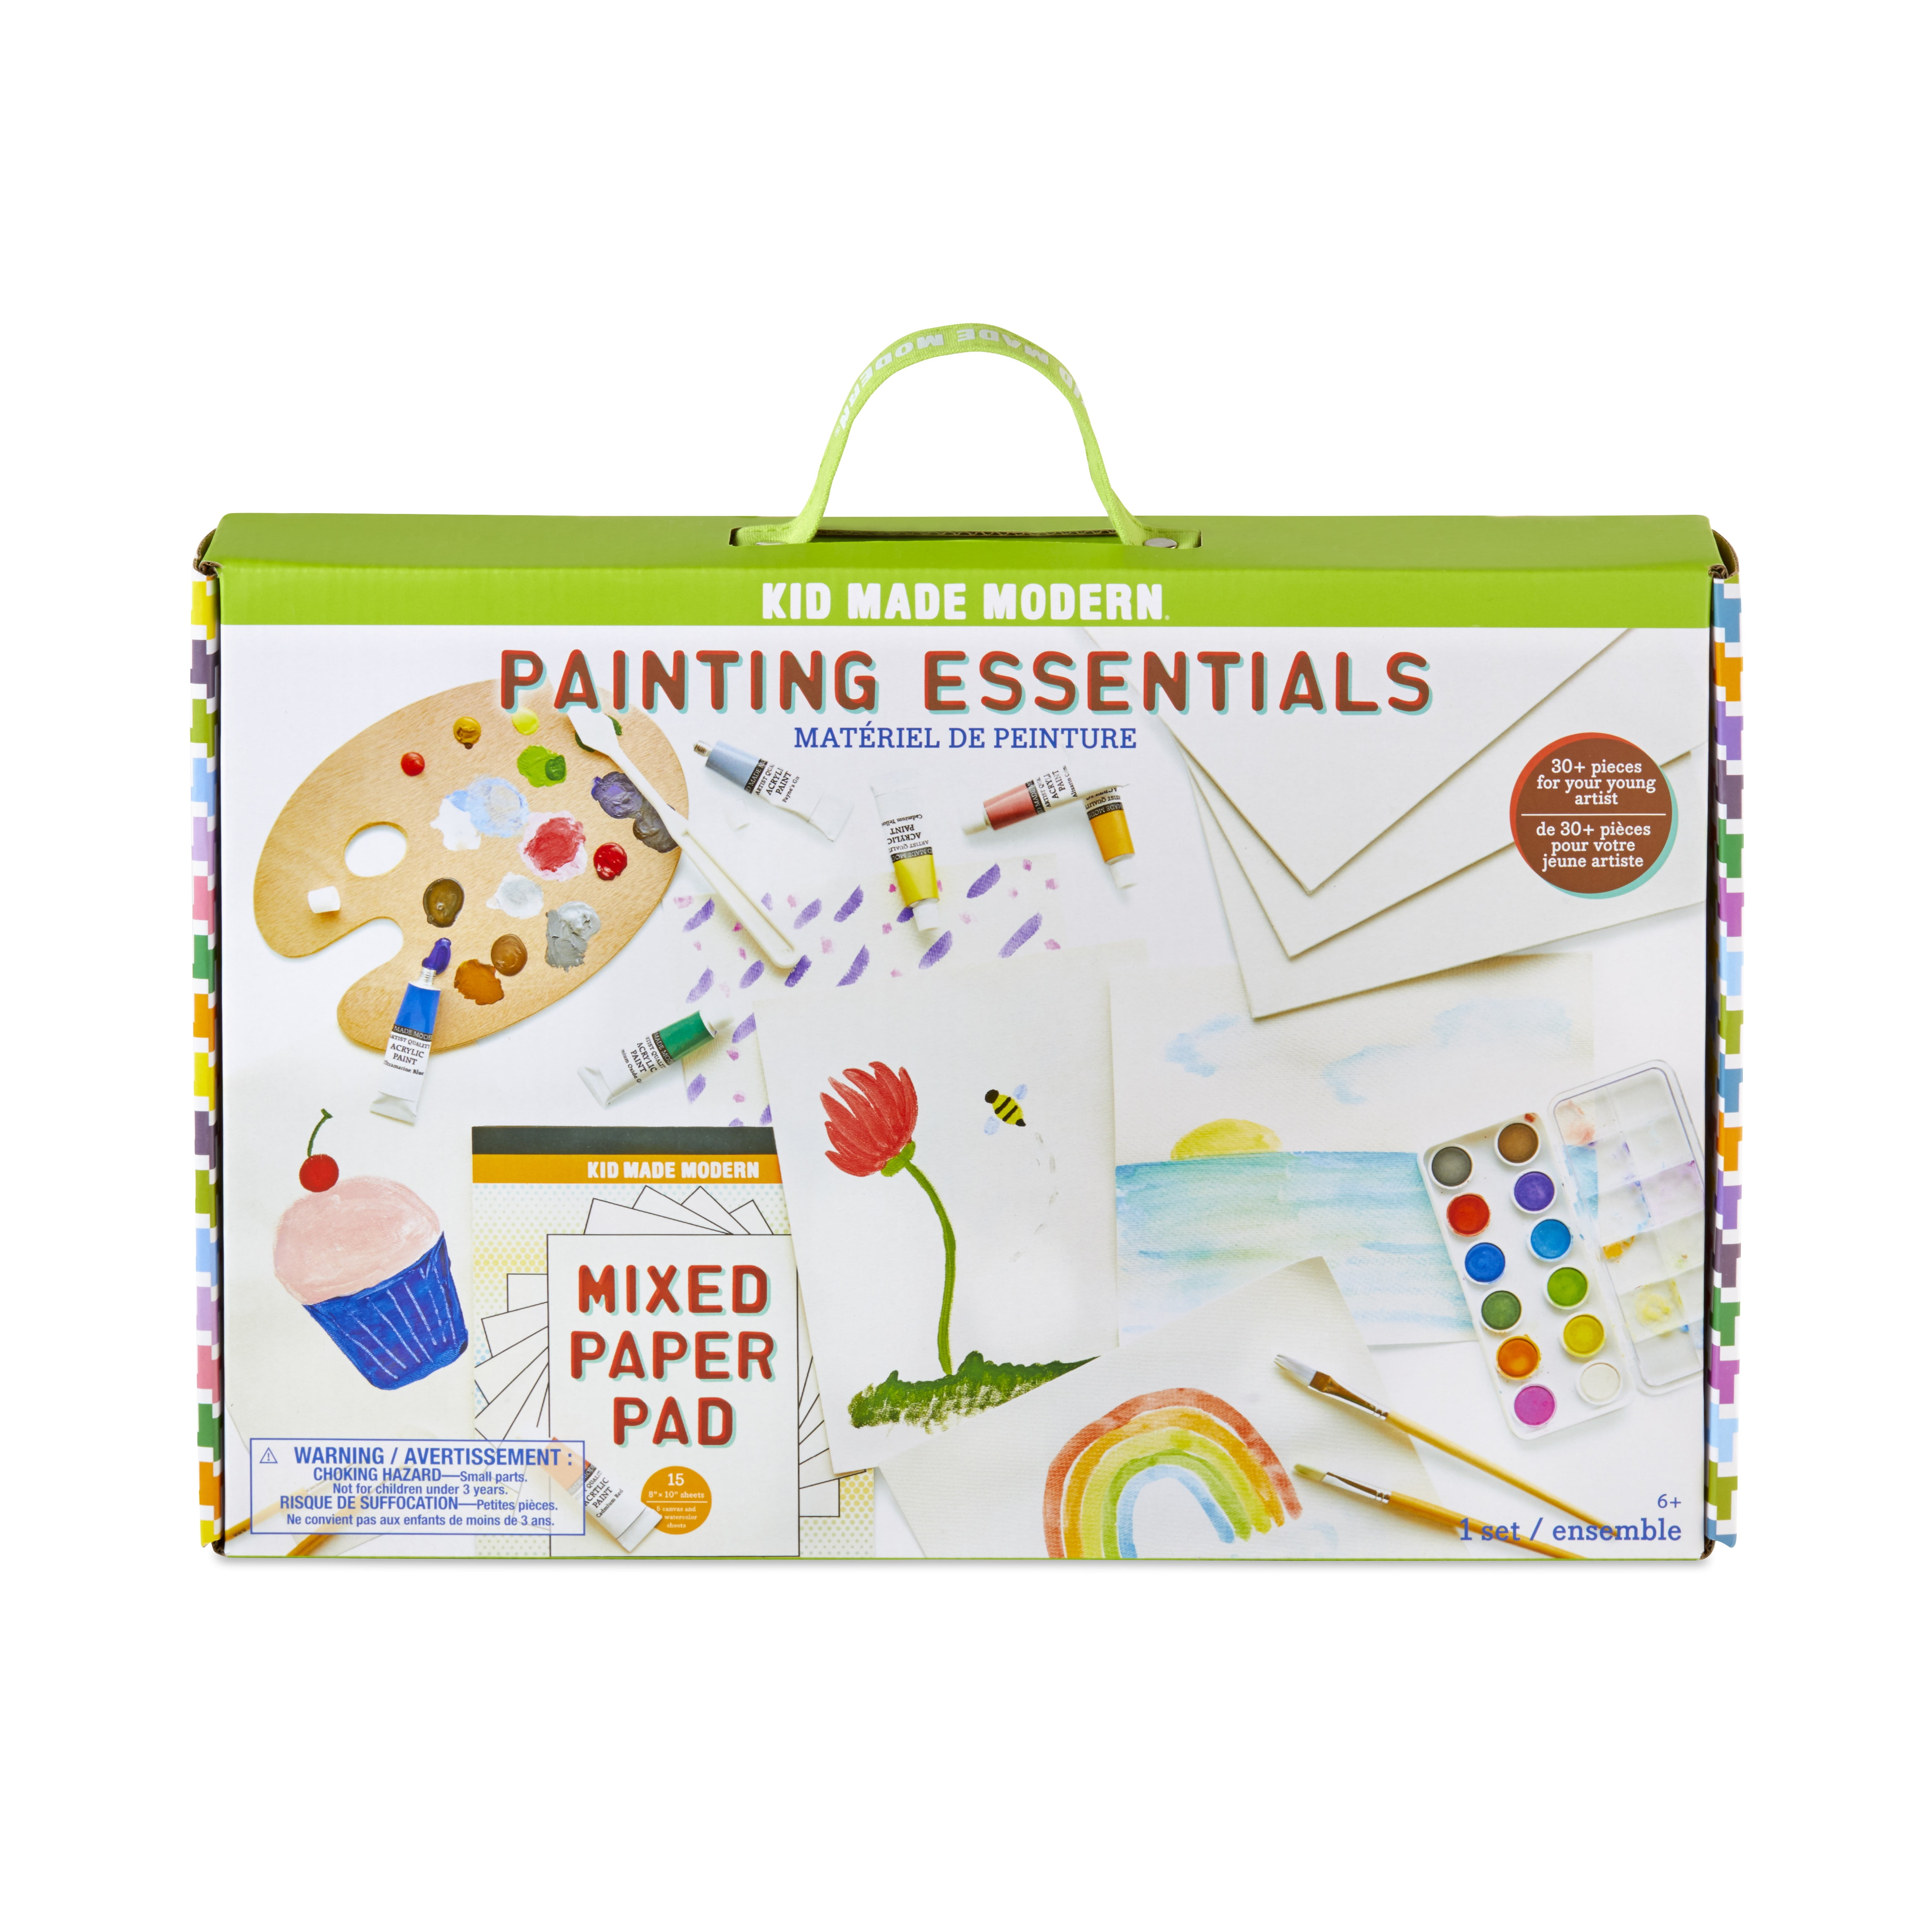 10 Essential Art Supplies Your Kids Need